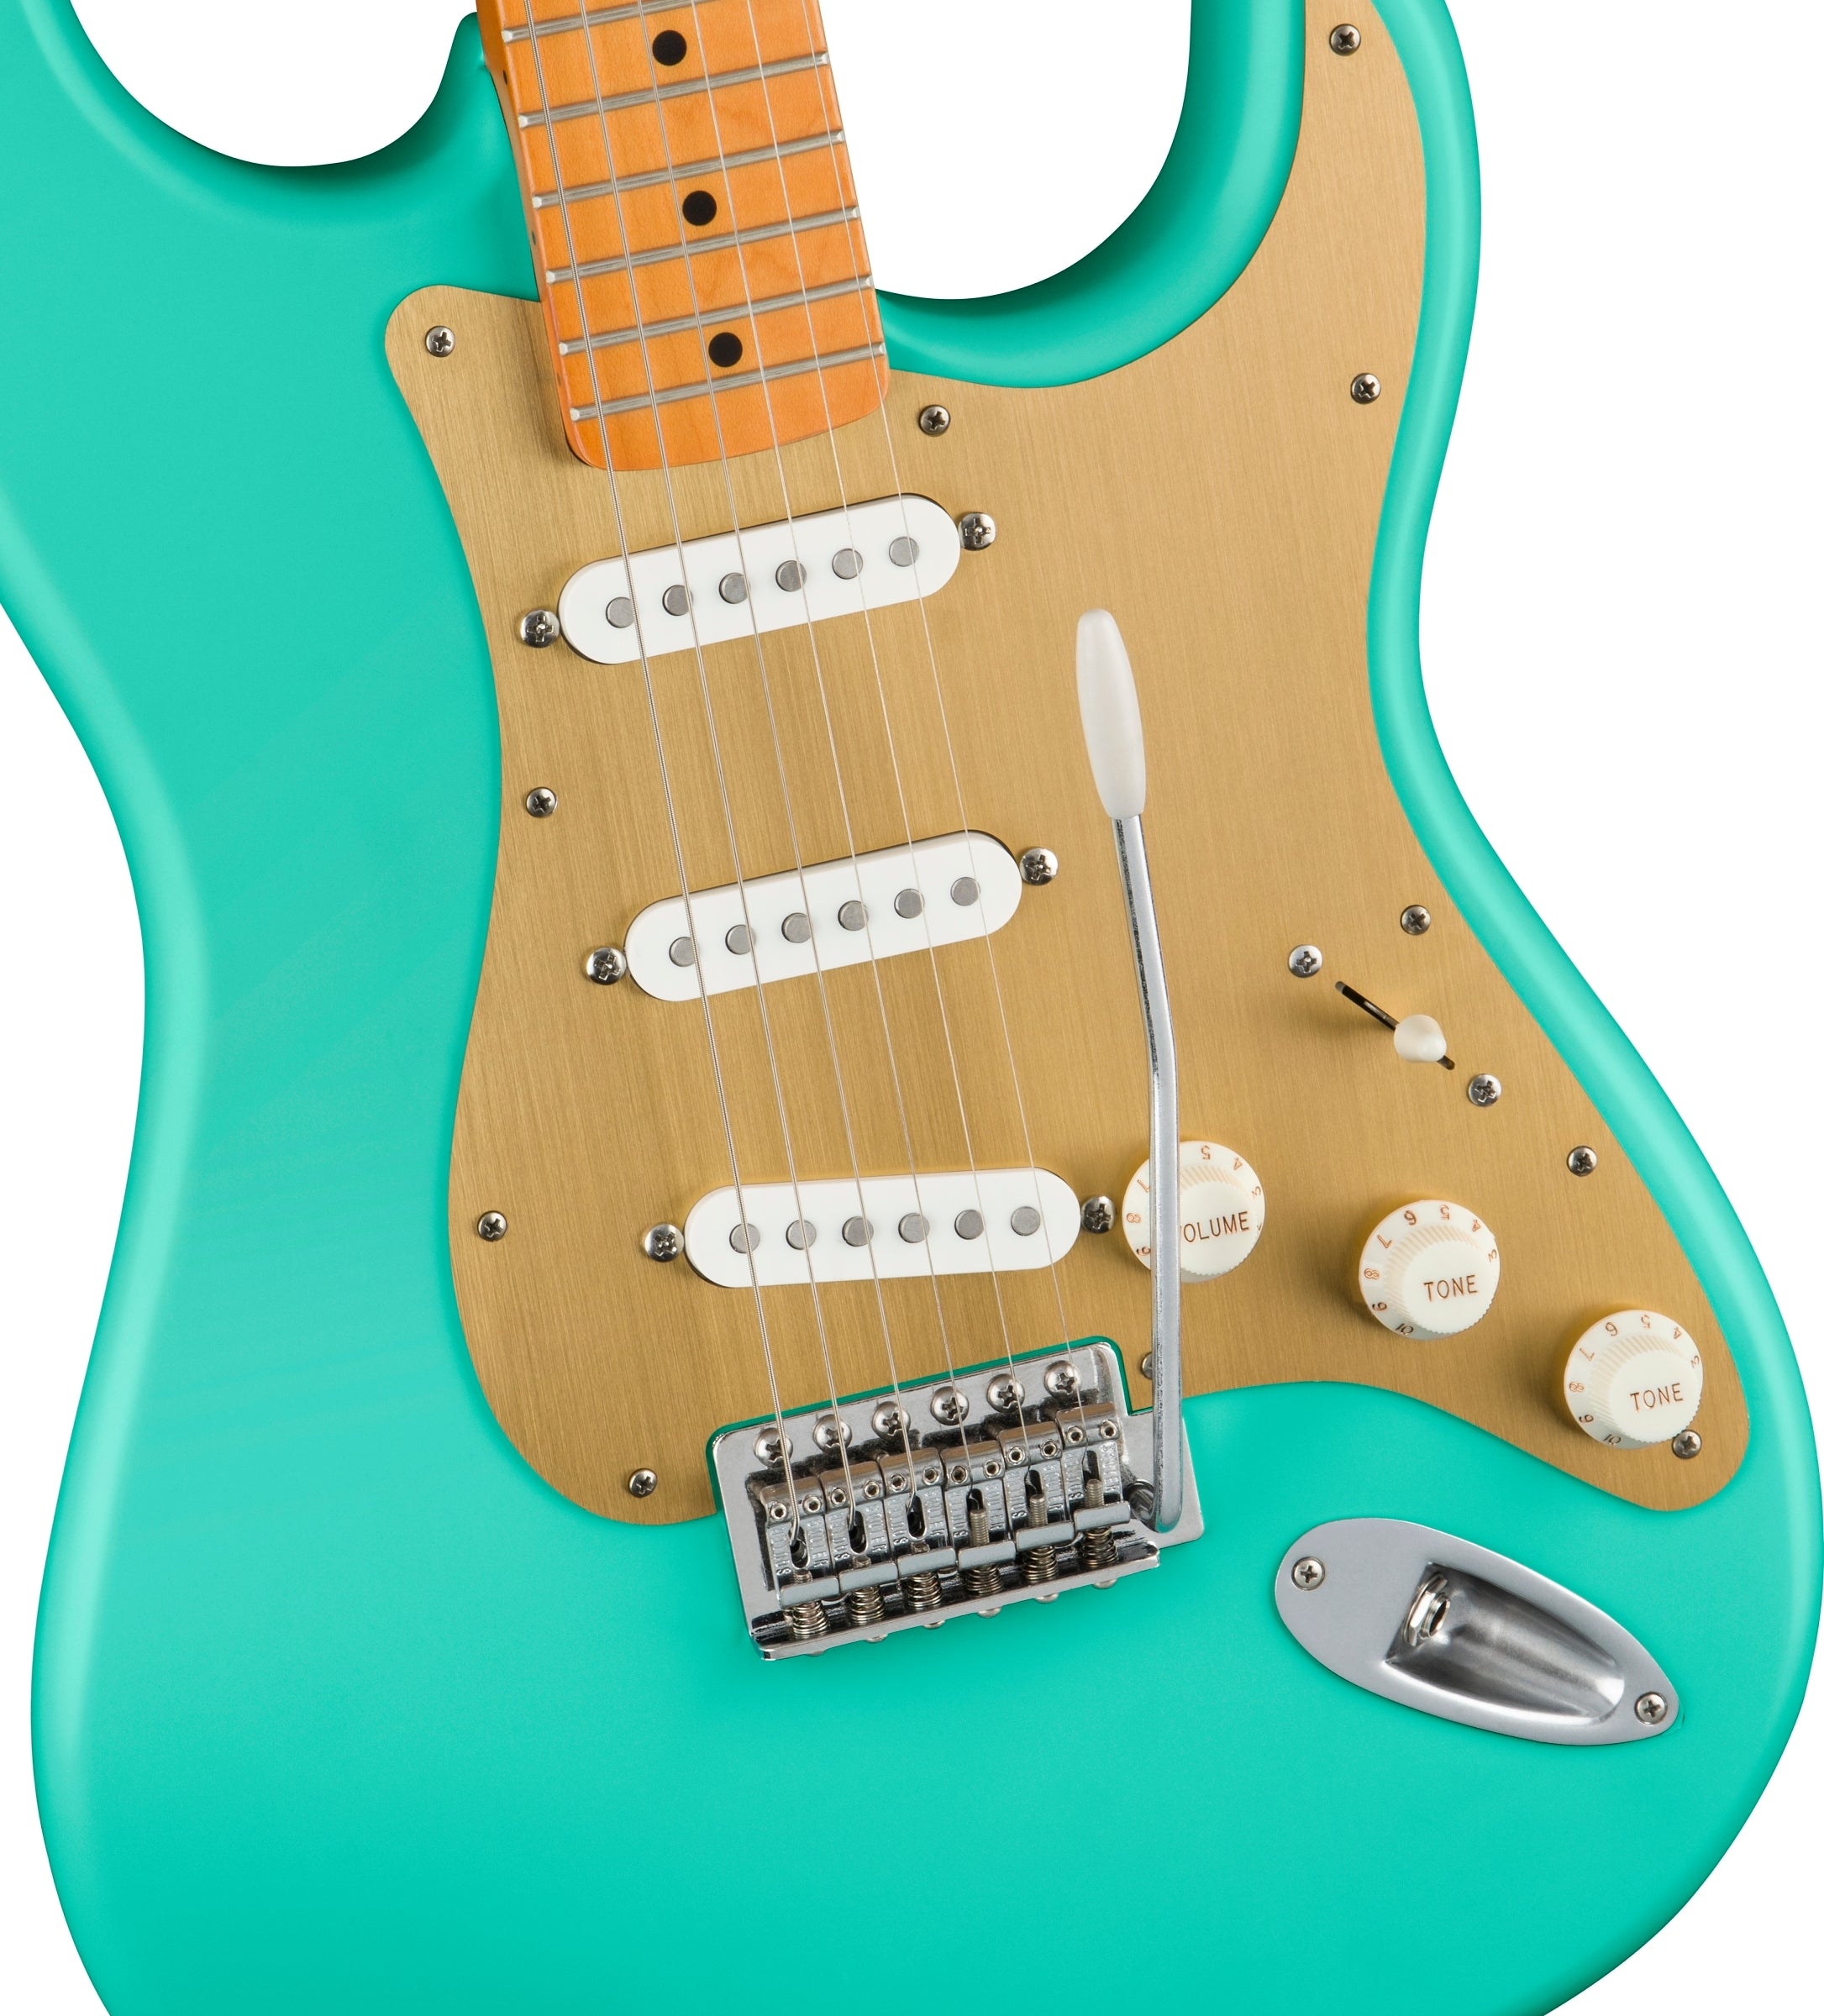 Squier 40th Anniversary Stratocaster Vintage Edition Electric Guitar - Satin Seafoam Green